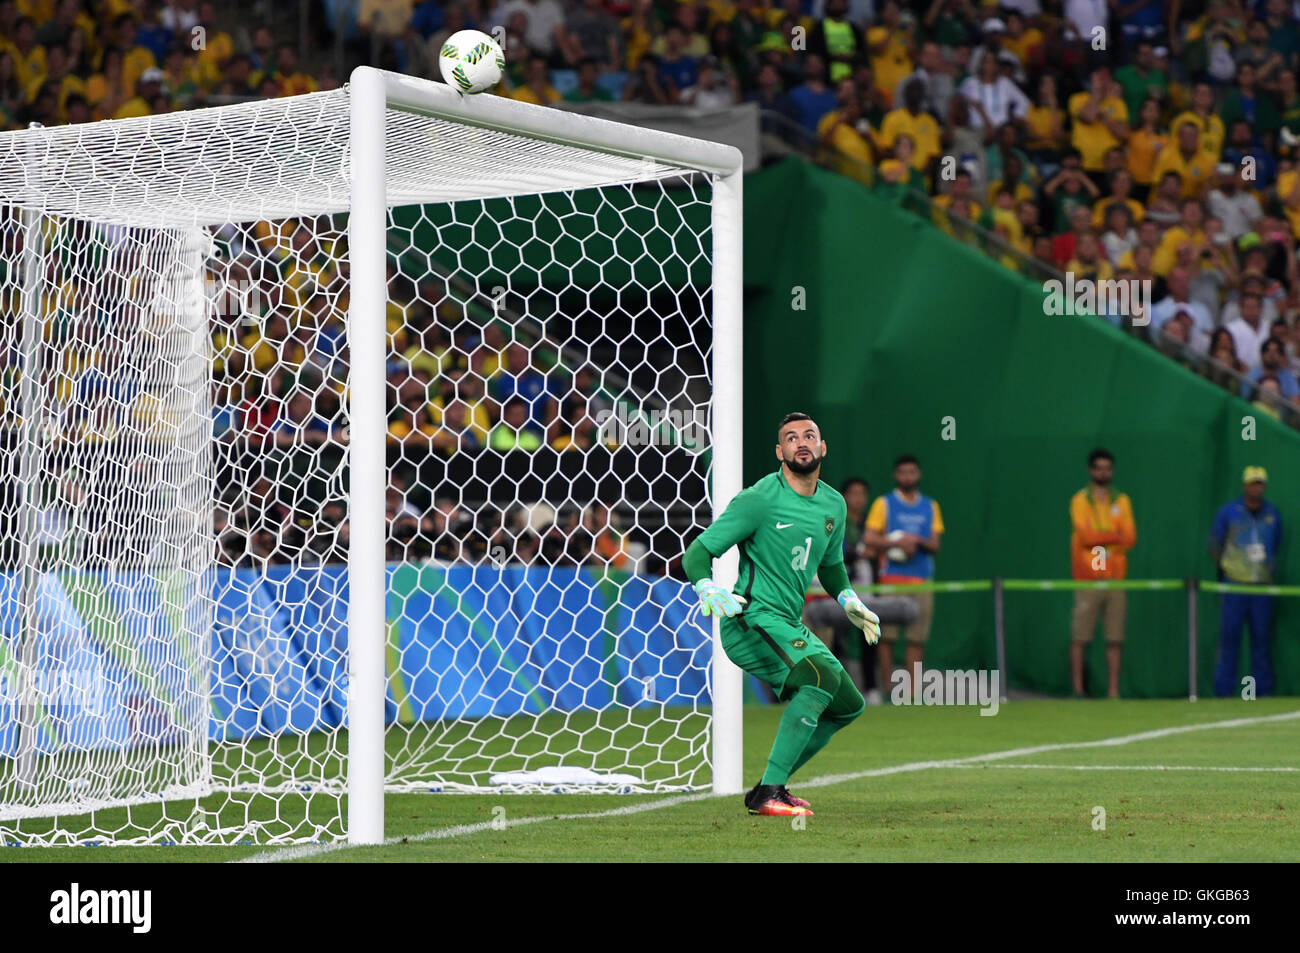 Rio de Janeiro, Brazil. 20th Aug, 2016. Weverton of Brazil looks on as a German player shoots against the bar during the Men's soccer Gold Medal Match between Brazil and Germany during the Rio 2016 Olympic Games at the Maracana in Rio de Janeiro, Brazil, 20 August 2016. Photo: Soeren Stache/dpa/Alamy Live News Stock Photo